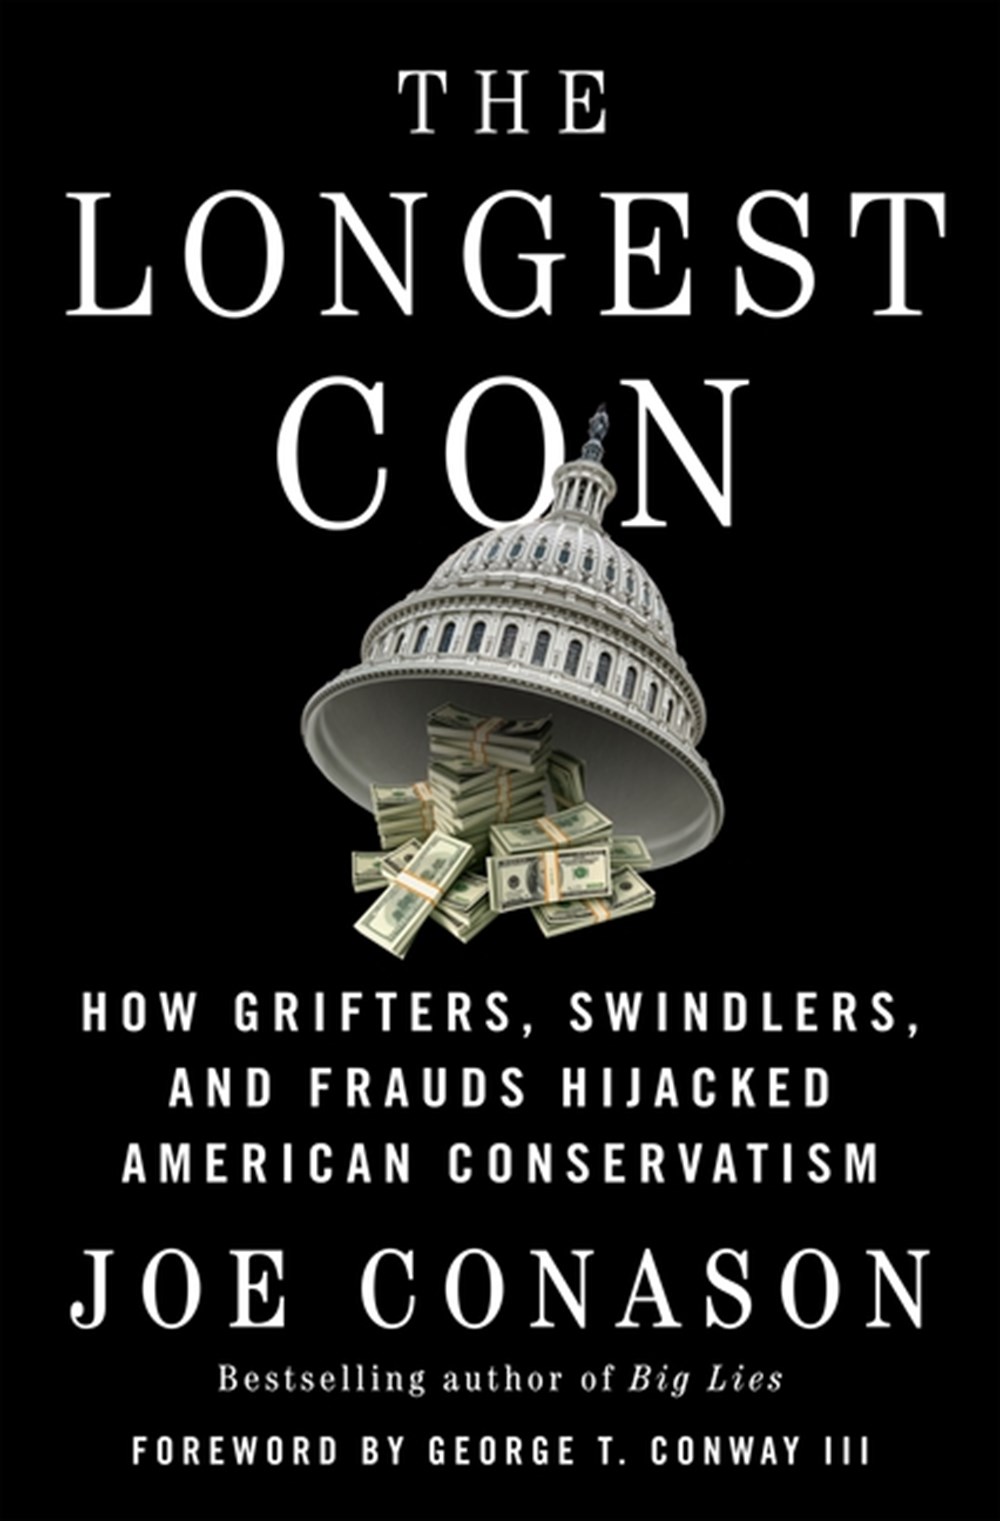 Longest Con: How Grifters, Swindlers, and Frauds Hijacked American Conservatism